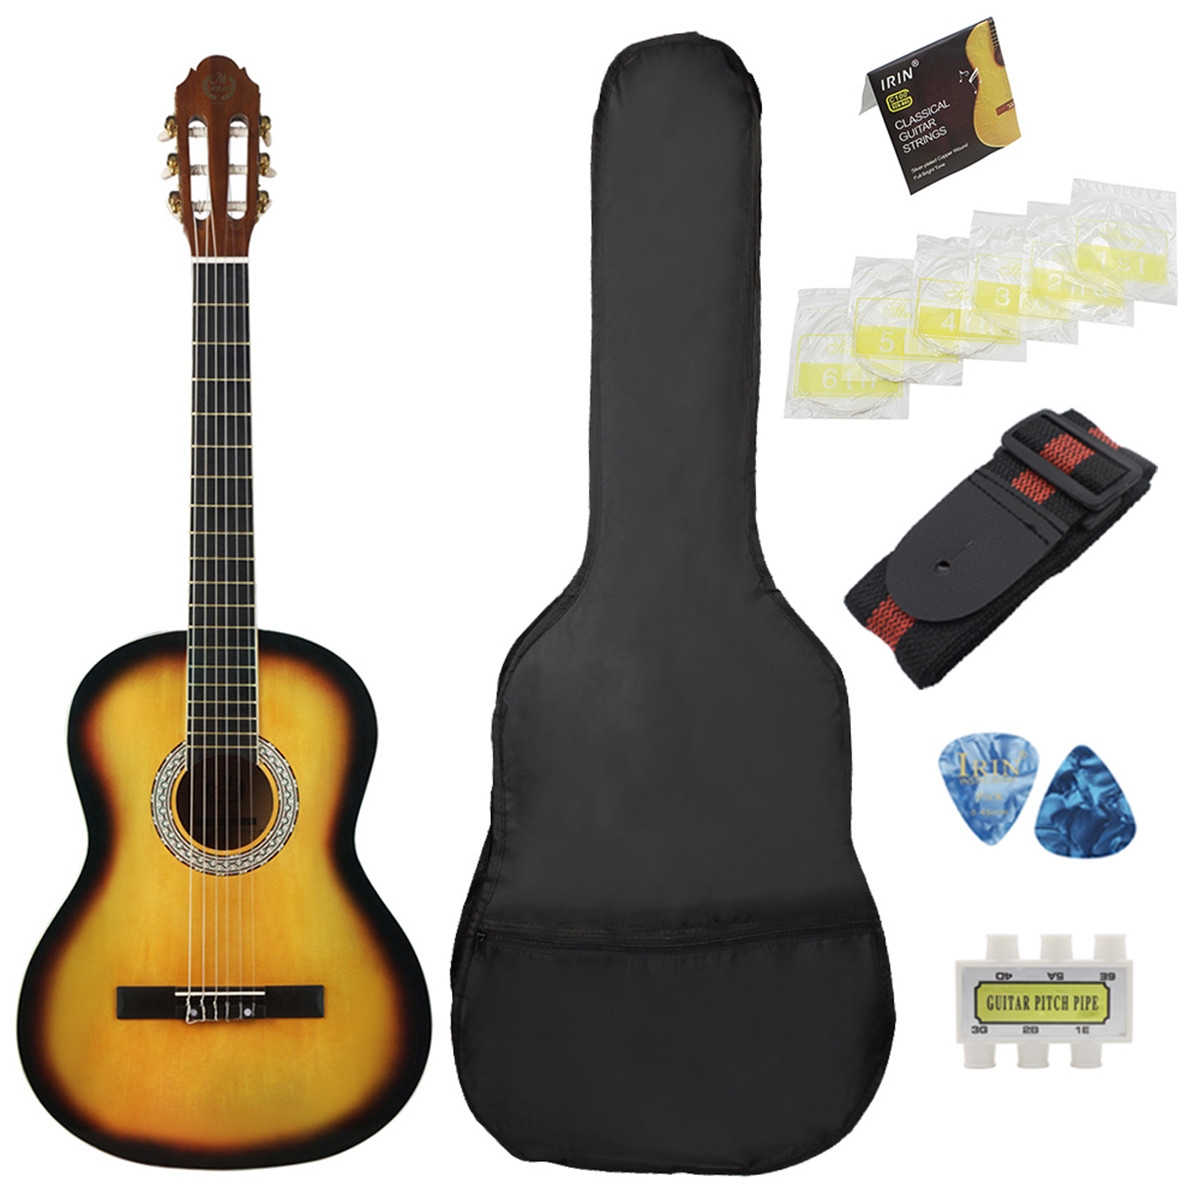 Mebite 39 Inch Classical Acoustic Wood Guitar with Bag/Strap/Plectrum/Strings/Guitar Pitch Pipe